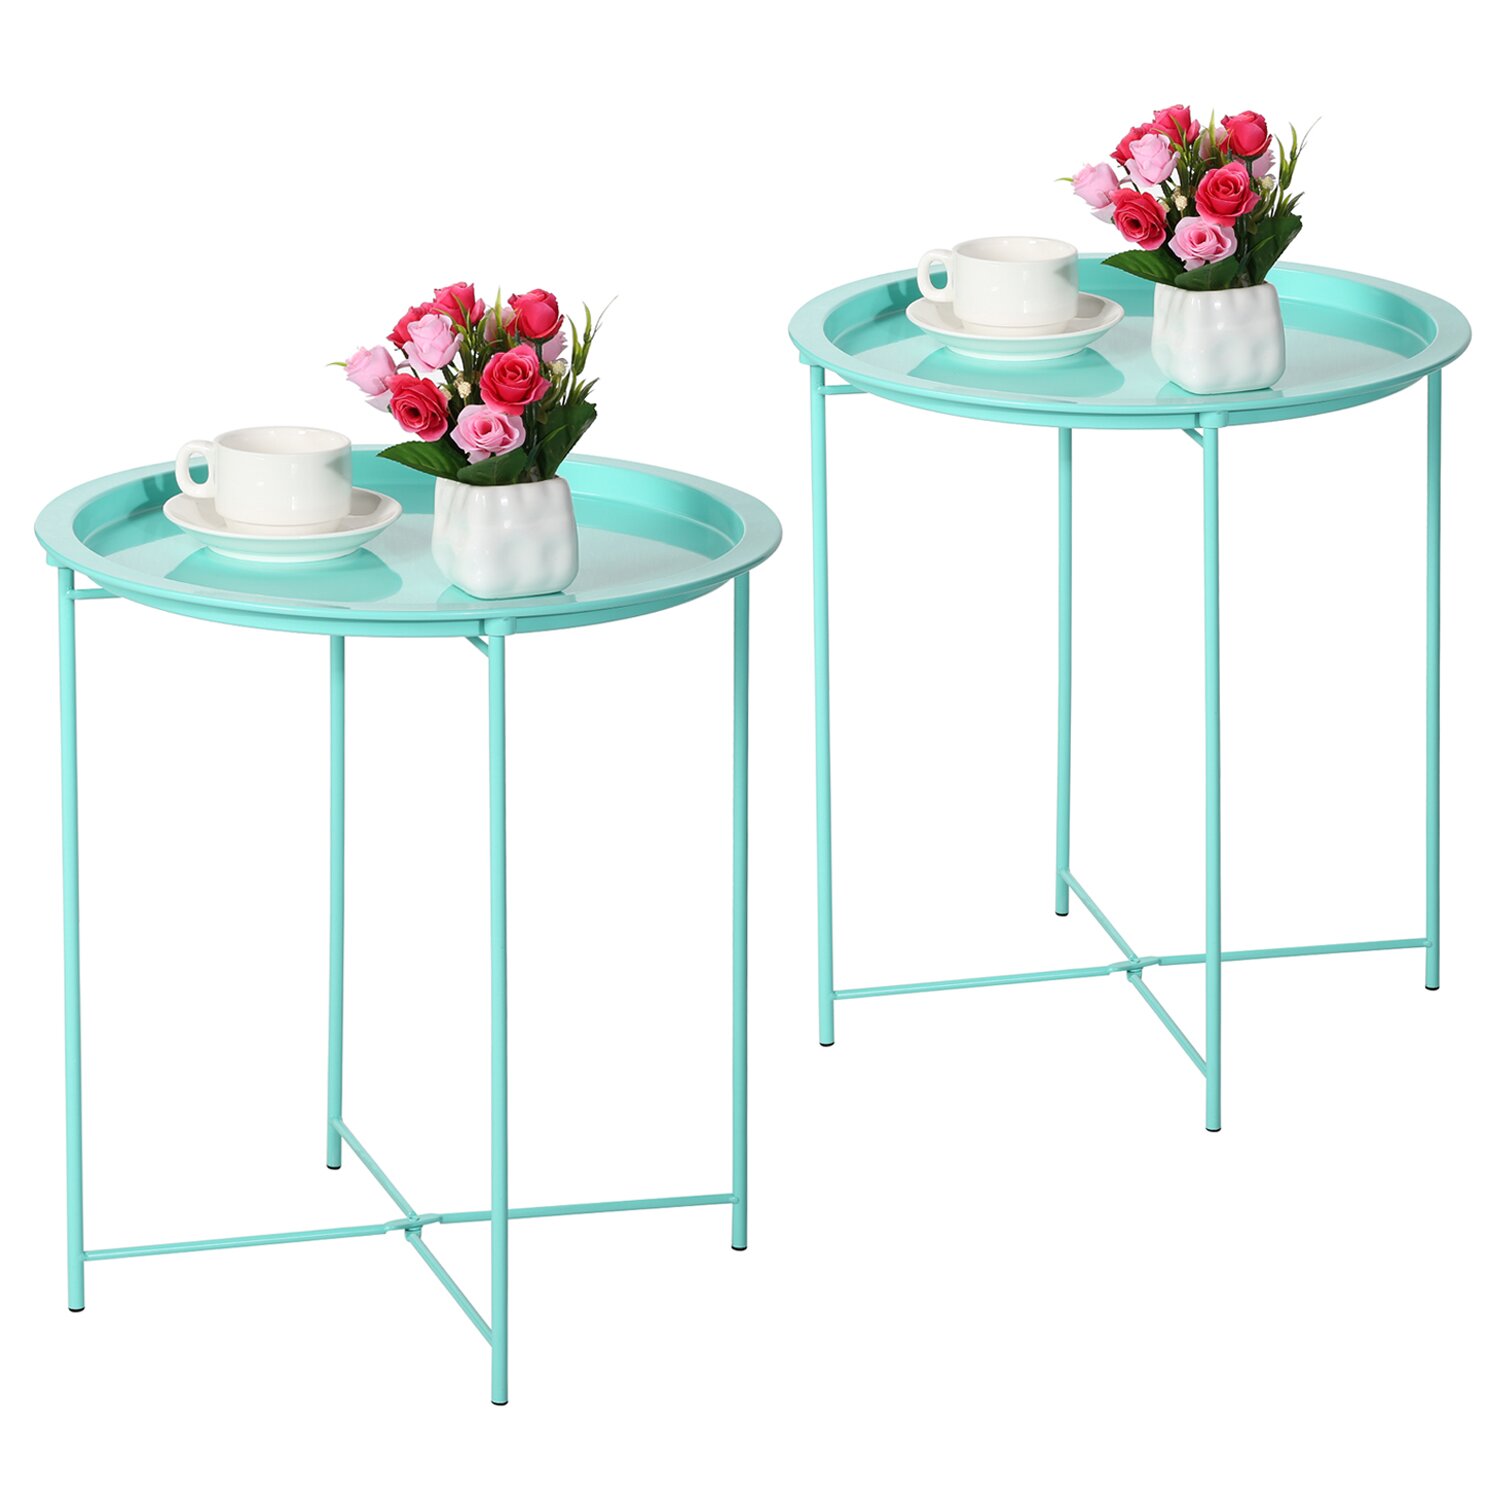 Annaleese Tray Top Cross Legs End Table Set, Multi-use:Small Round Side End Table, Sofa Table, Tray Side Table, Snack Table, Metal, Anti-Rusty, Outdoor and Indoor Use for Putting Small Thing - image 2 of 2